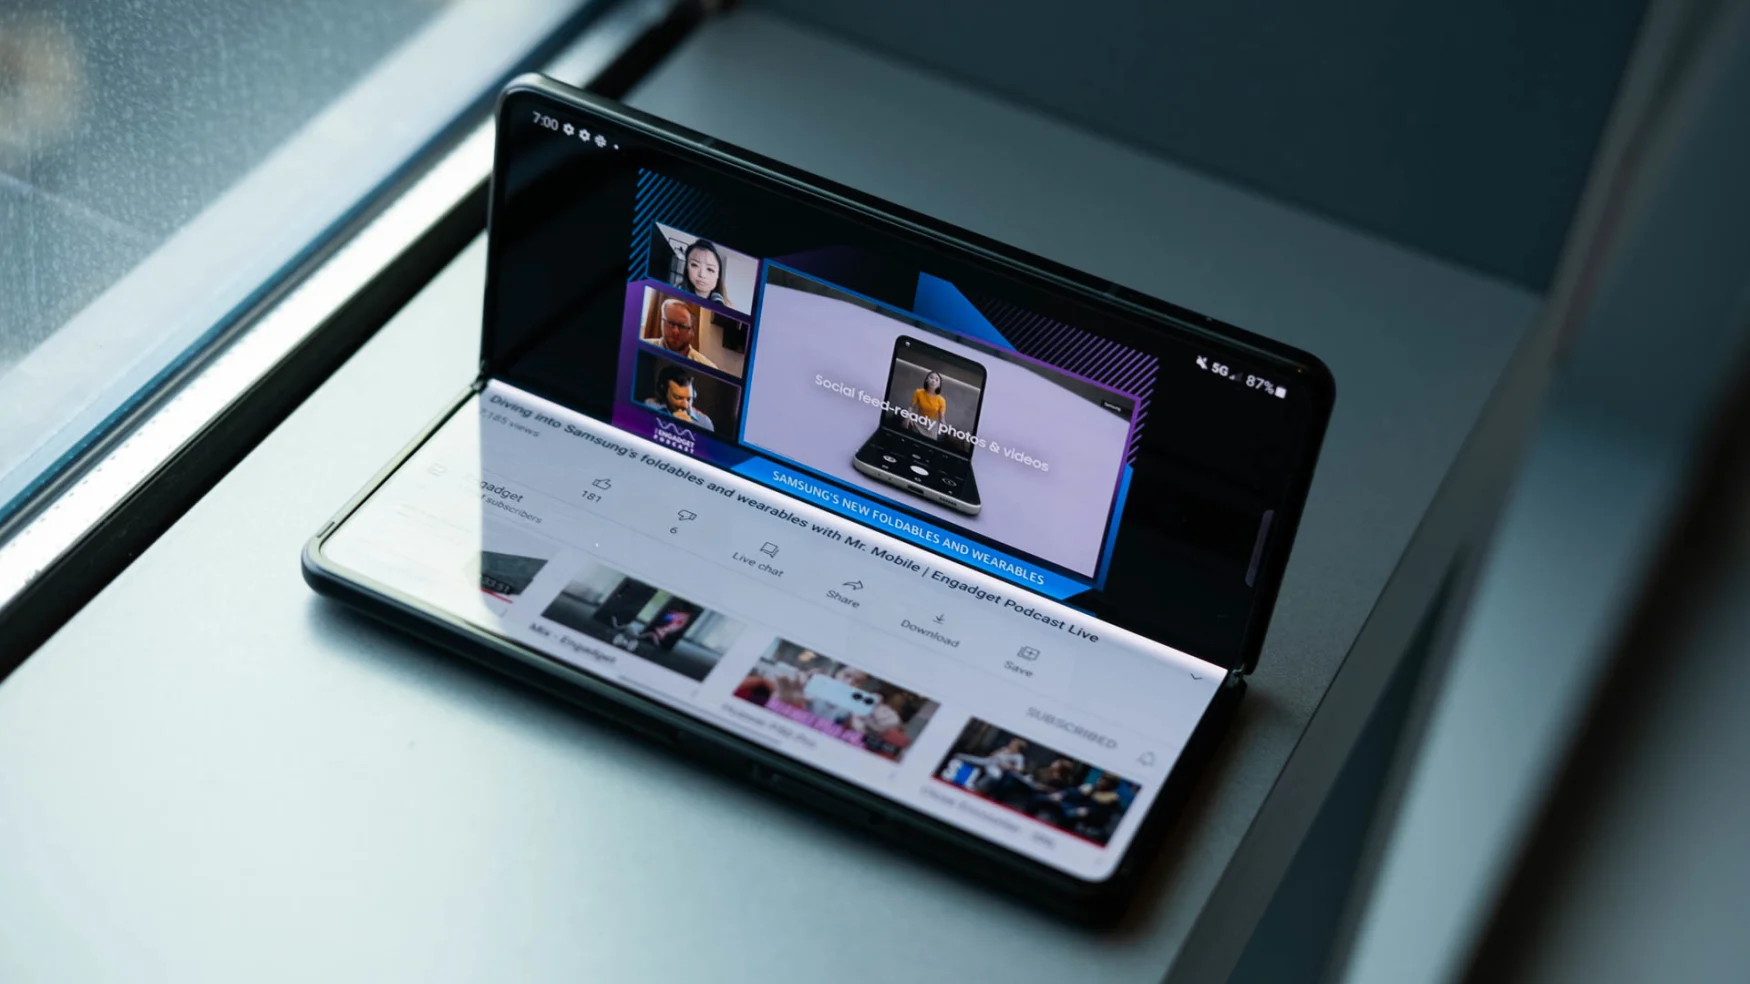 Watching a video with the Samsung Galaxy Z Fold 3 half bent and sitting up on a window ledge like a mini laptop.